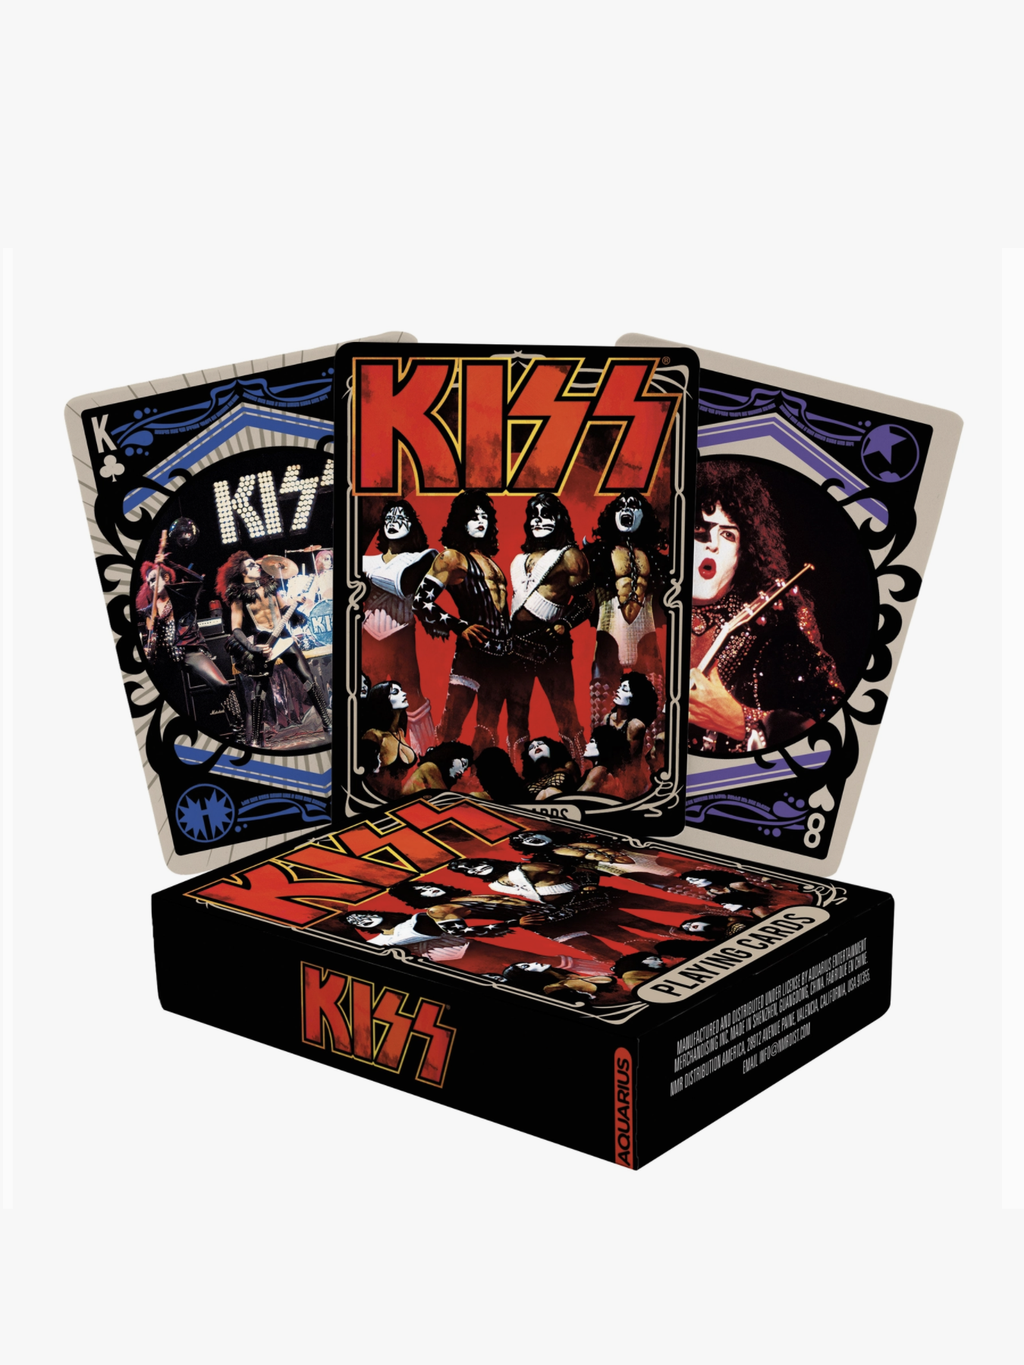 KISS Playing Cards